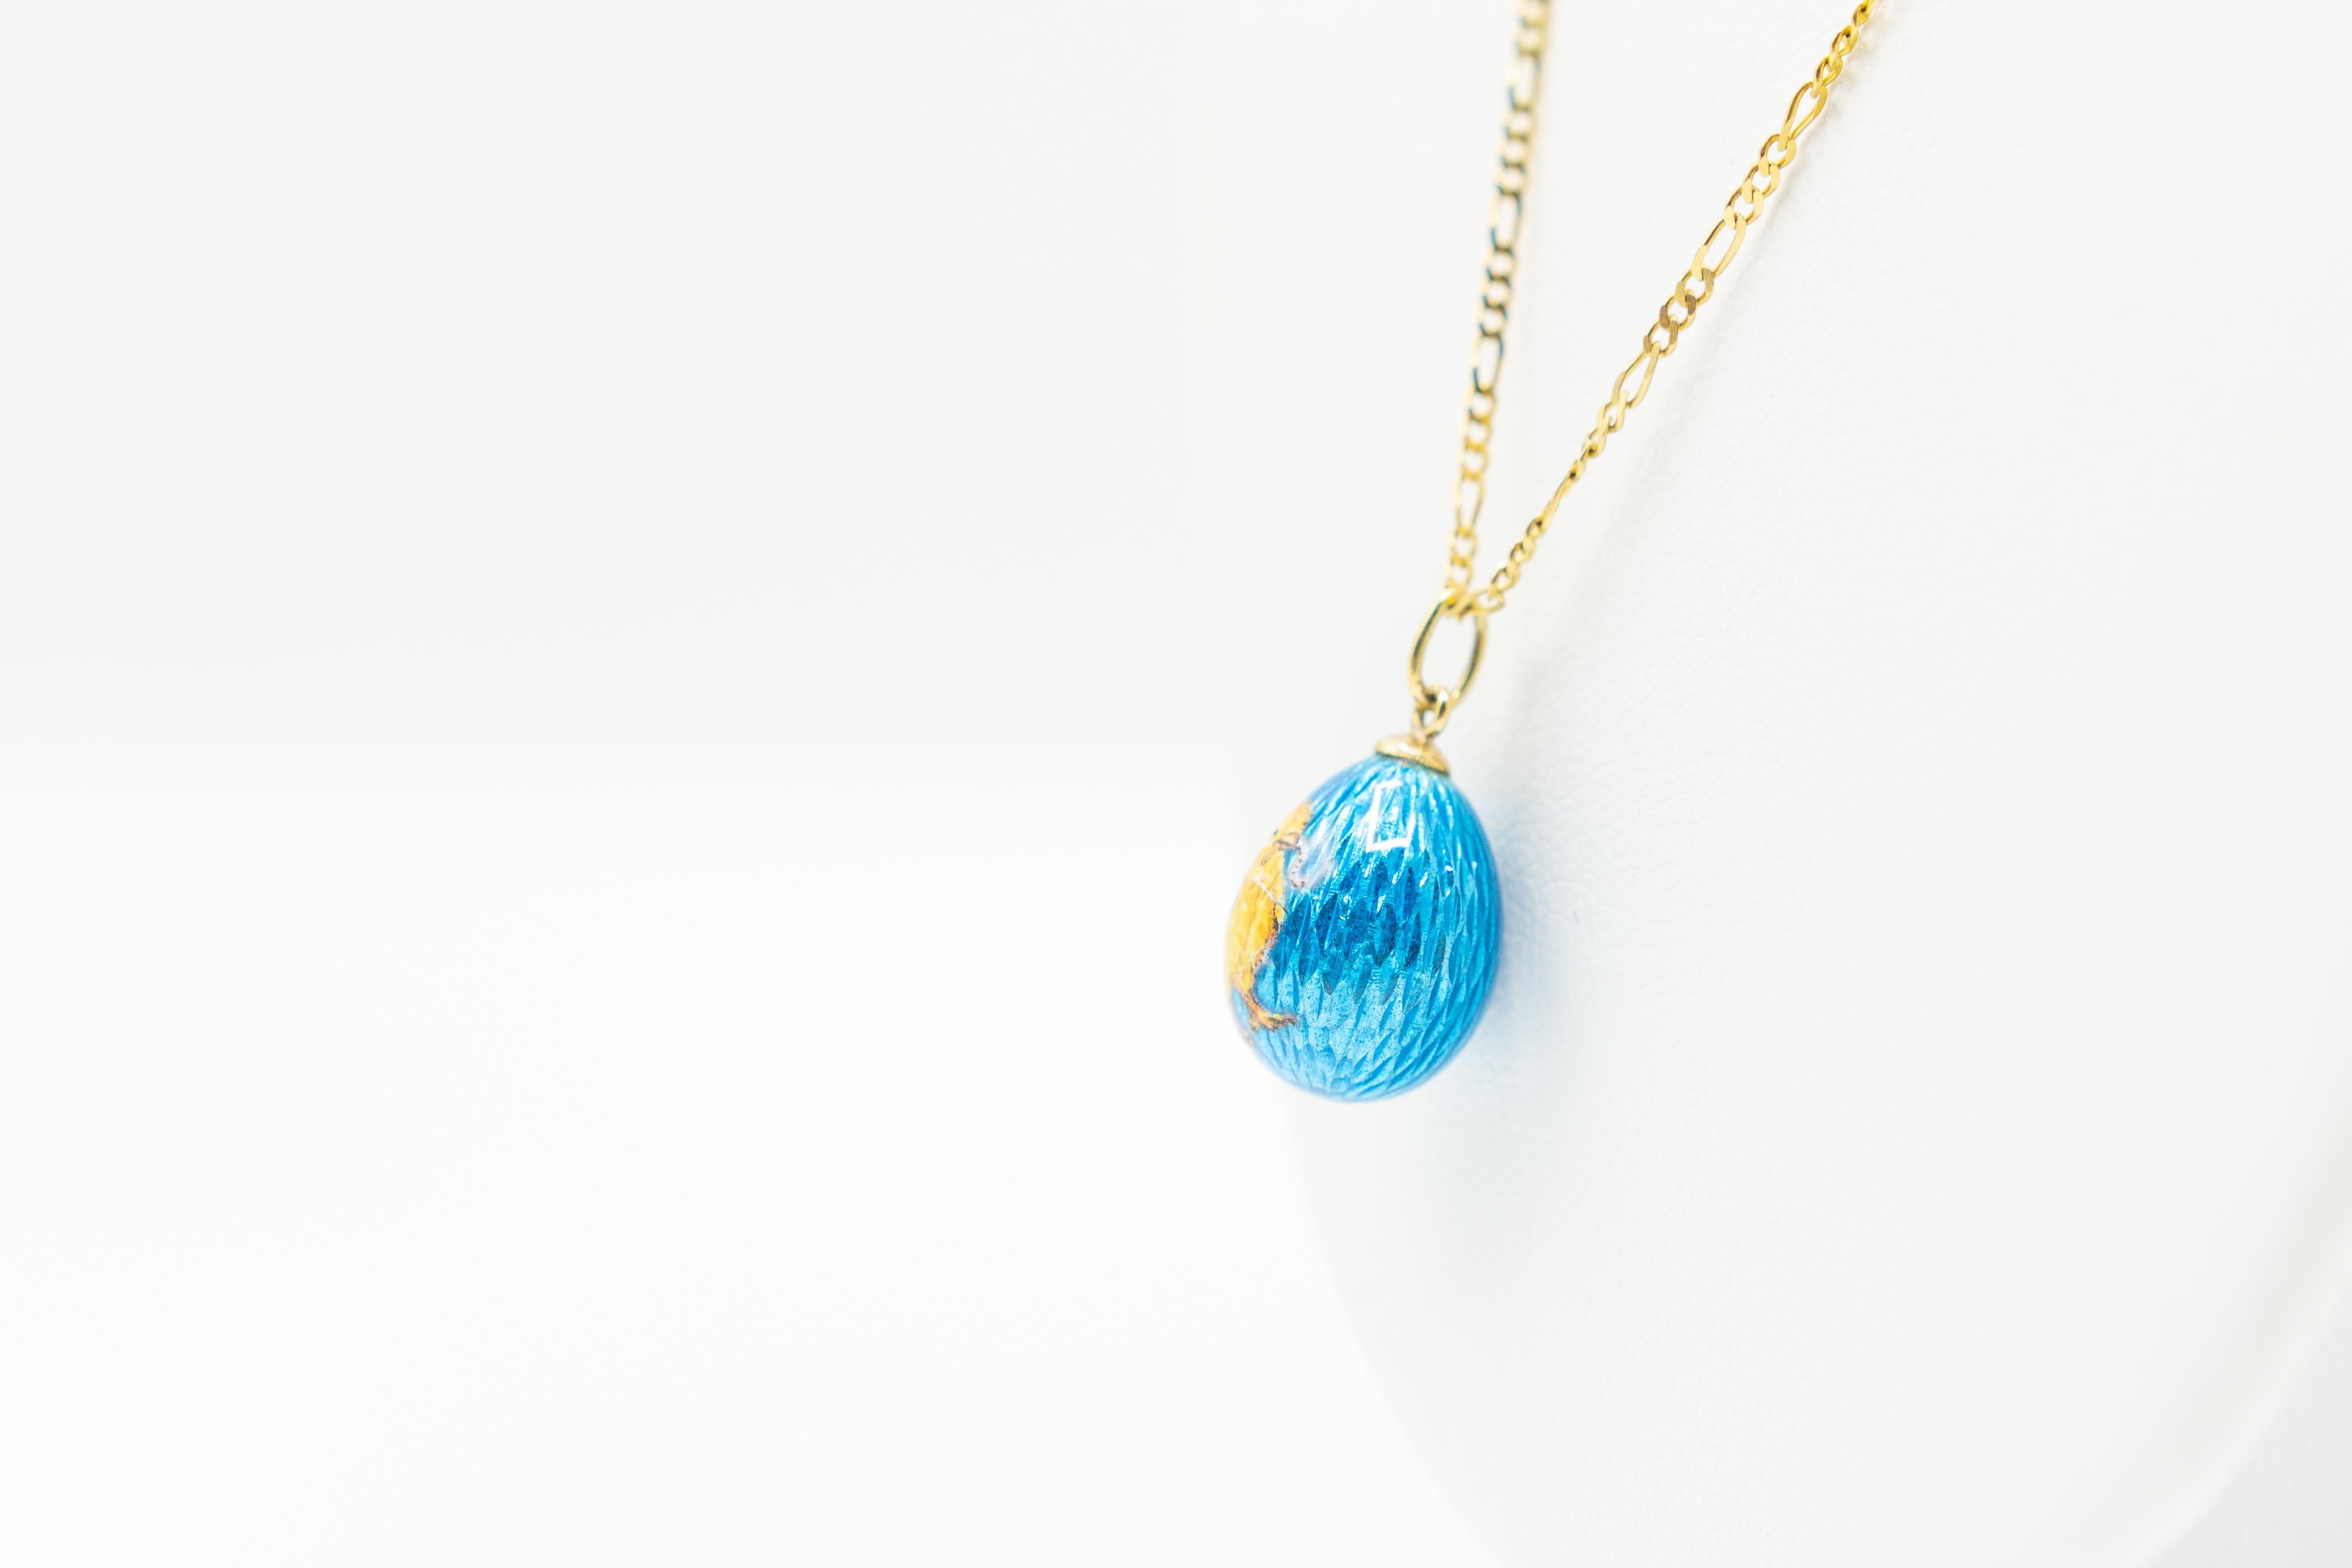 Russian 14k Gold Guilloche Enamel Egg Chick Vintage Charm Pendent, Iridescent Guilloche Enamel Egg in 14k gold

The enamel is a lovely turquoise blue that has wonderful sheen. The front is decorated with an adorable yellow chick, a symbol synonymous